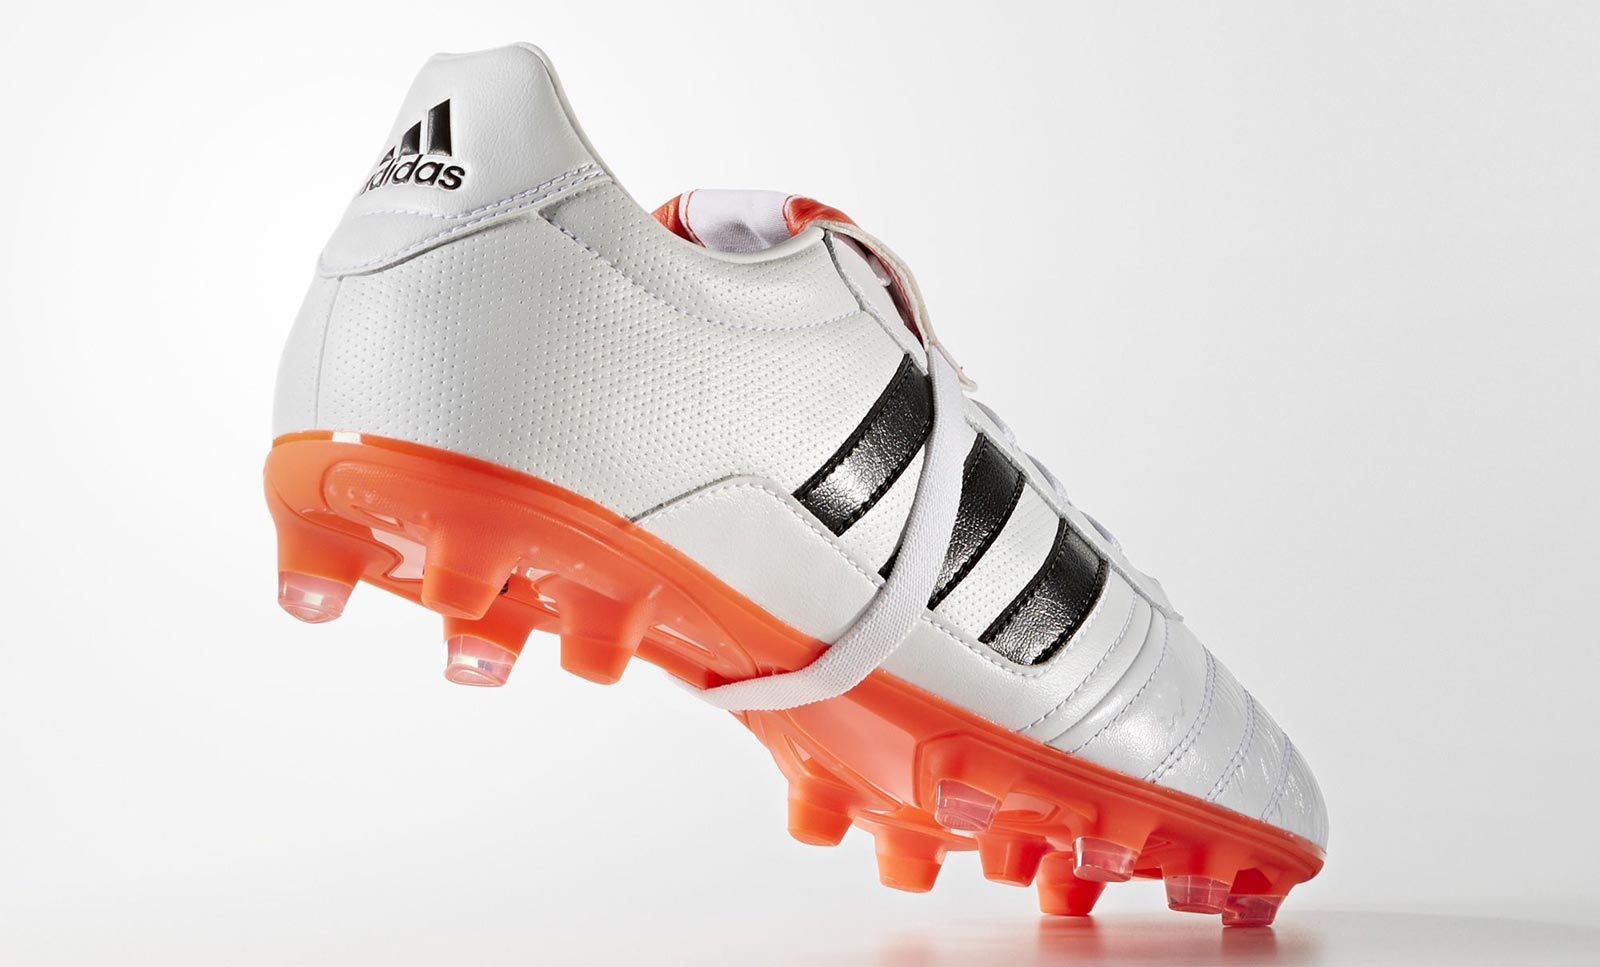 White / Red Gloro 15 Boots Released - Footy